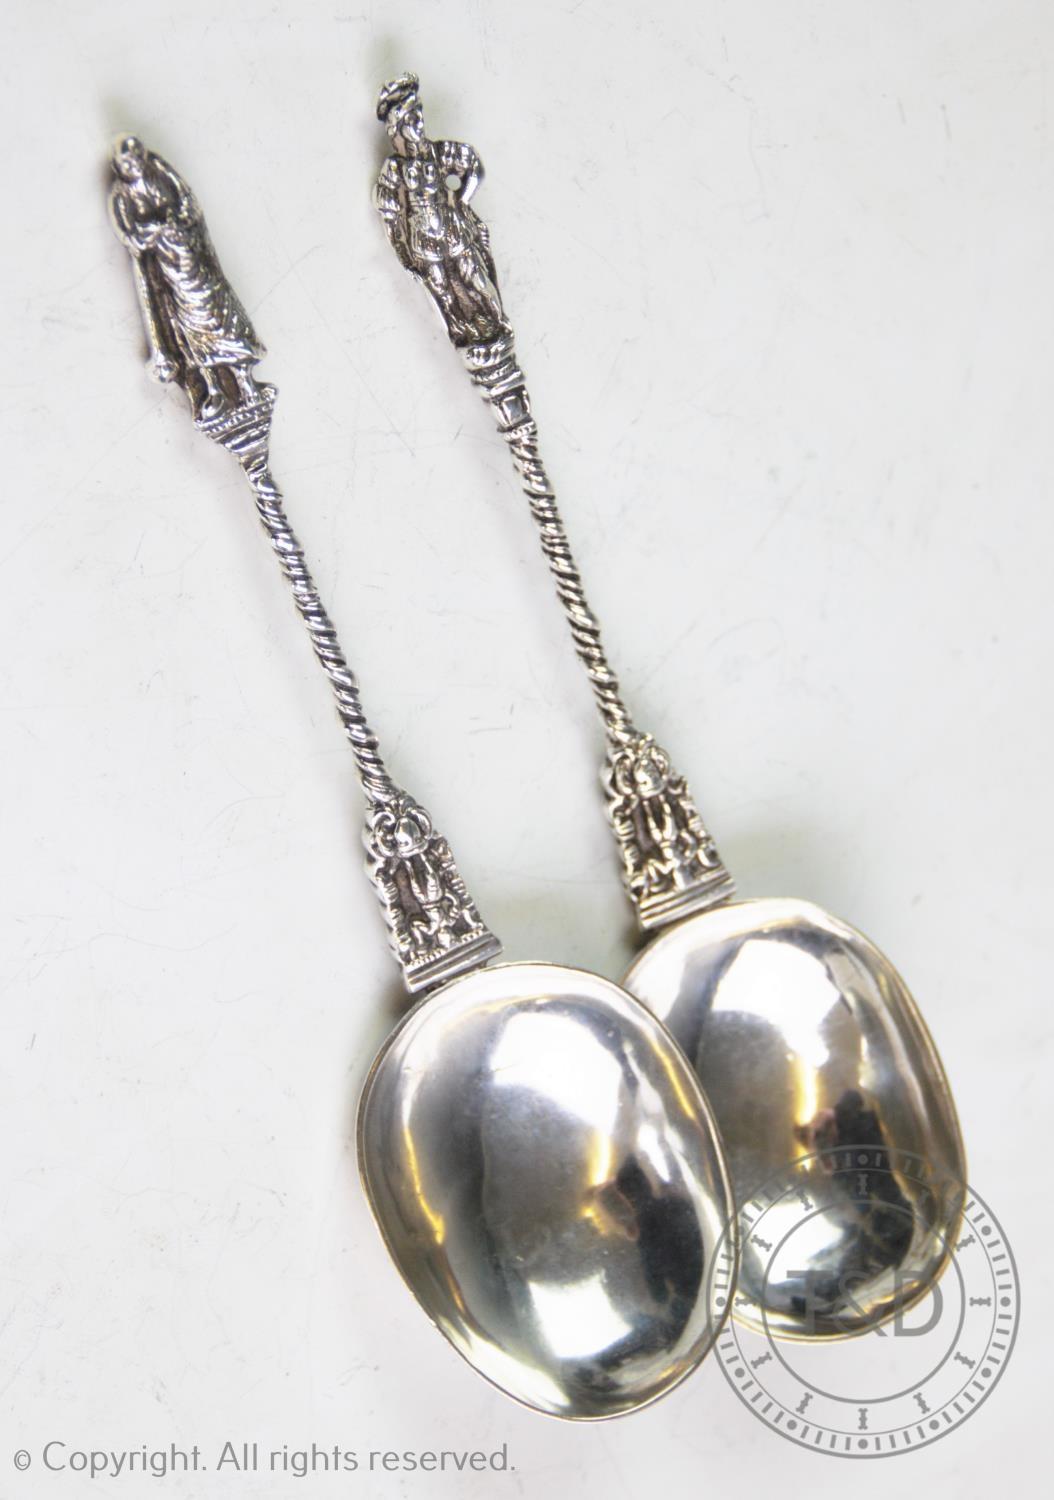 A pair of continental white metal apostle spoons, with oval bowls, chased and rope-twist stems and